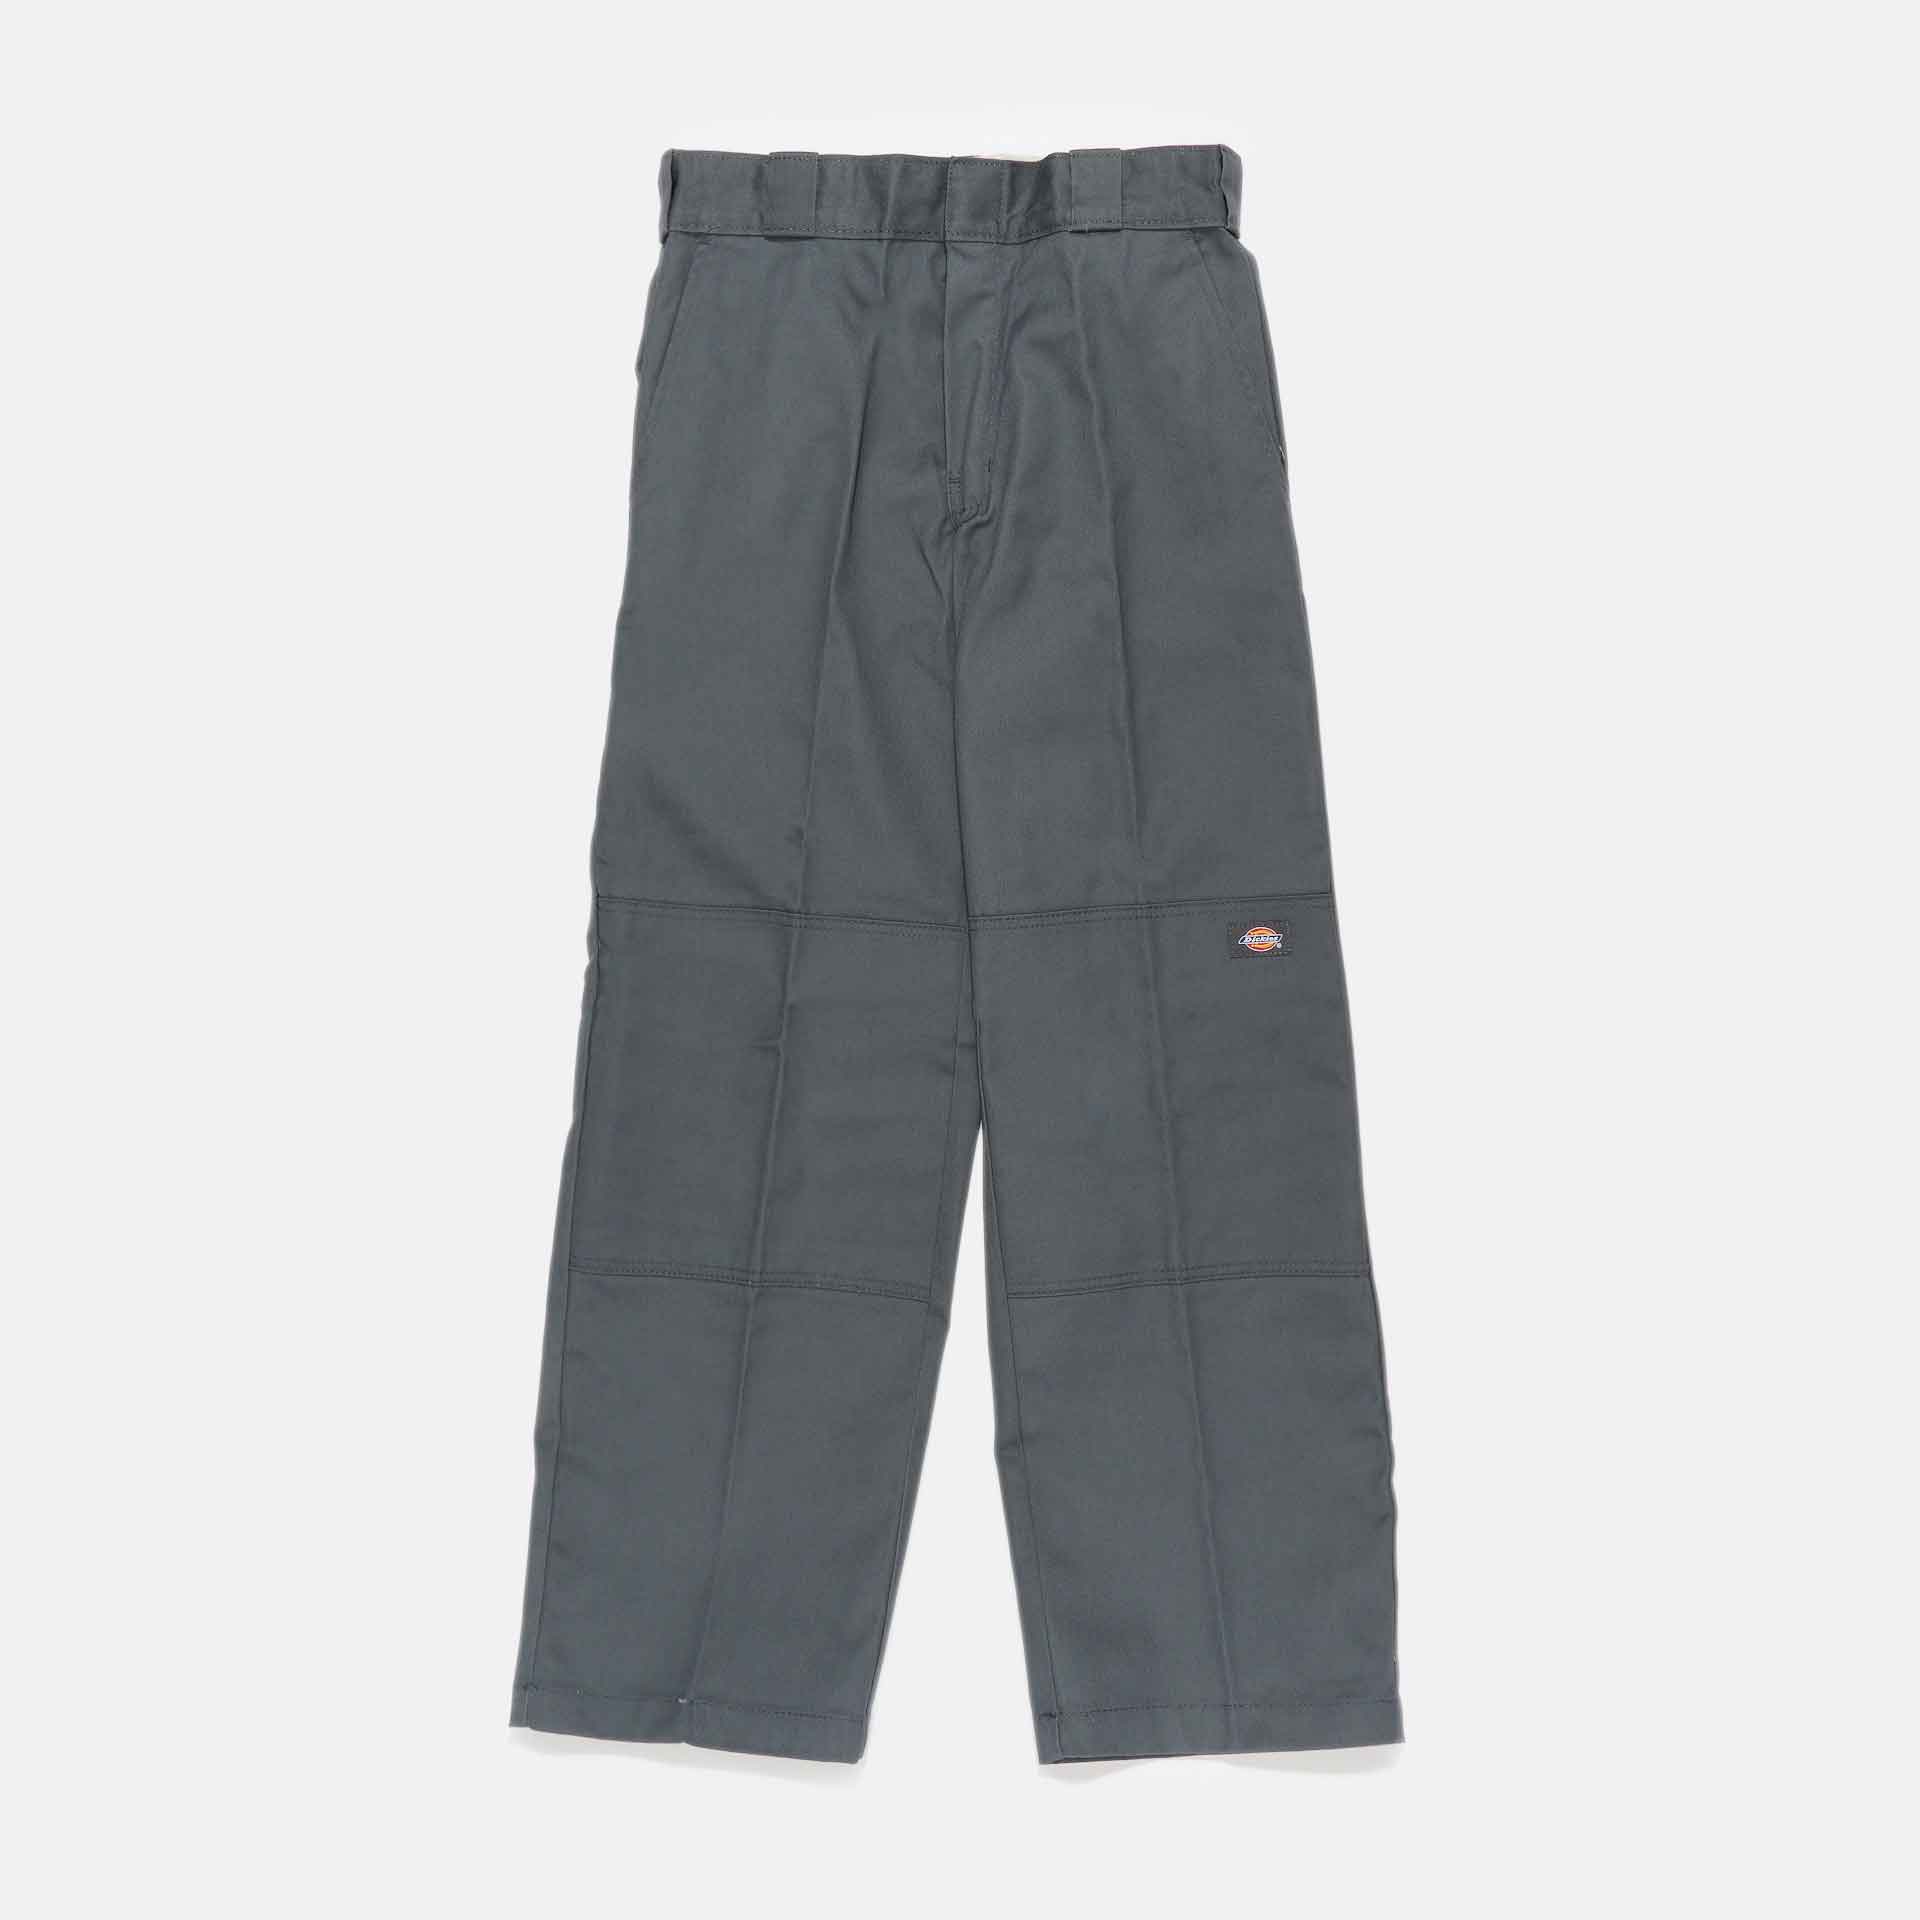 Dickies Double Knee Recycled Denim Pant Charcoal Grey